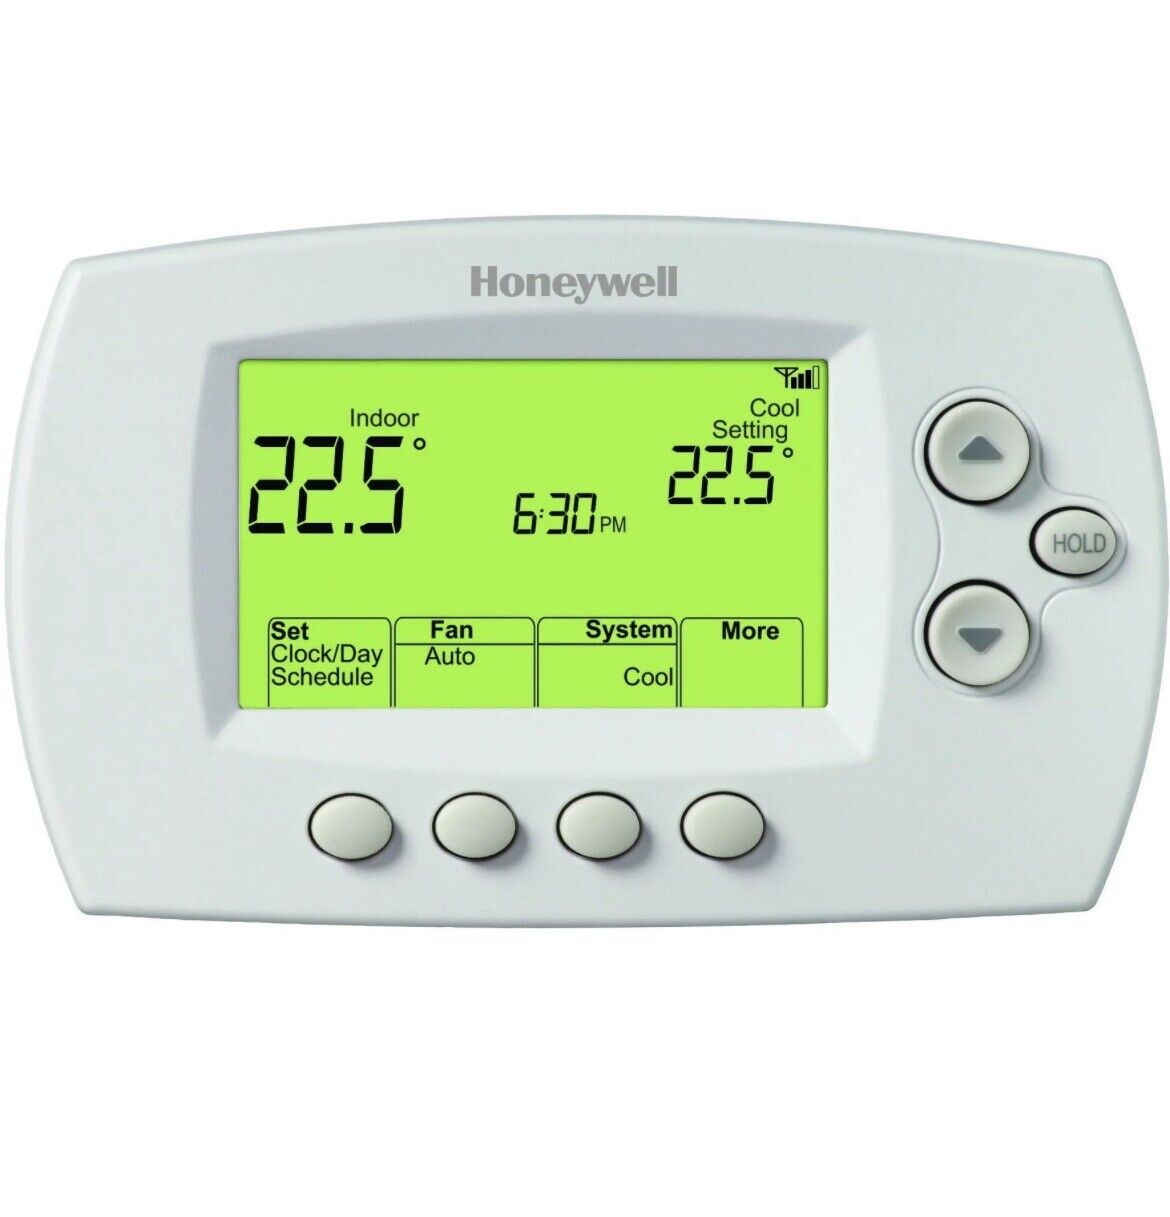 Honeywell RTH6580WF Wi-Fi 7-Day Programmable Thermostat *New Open Box*